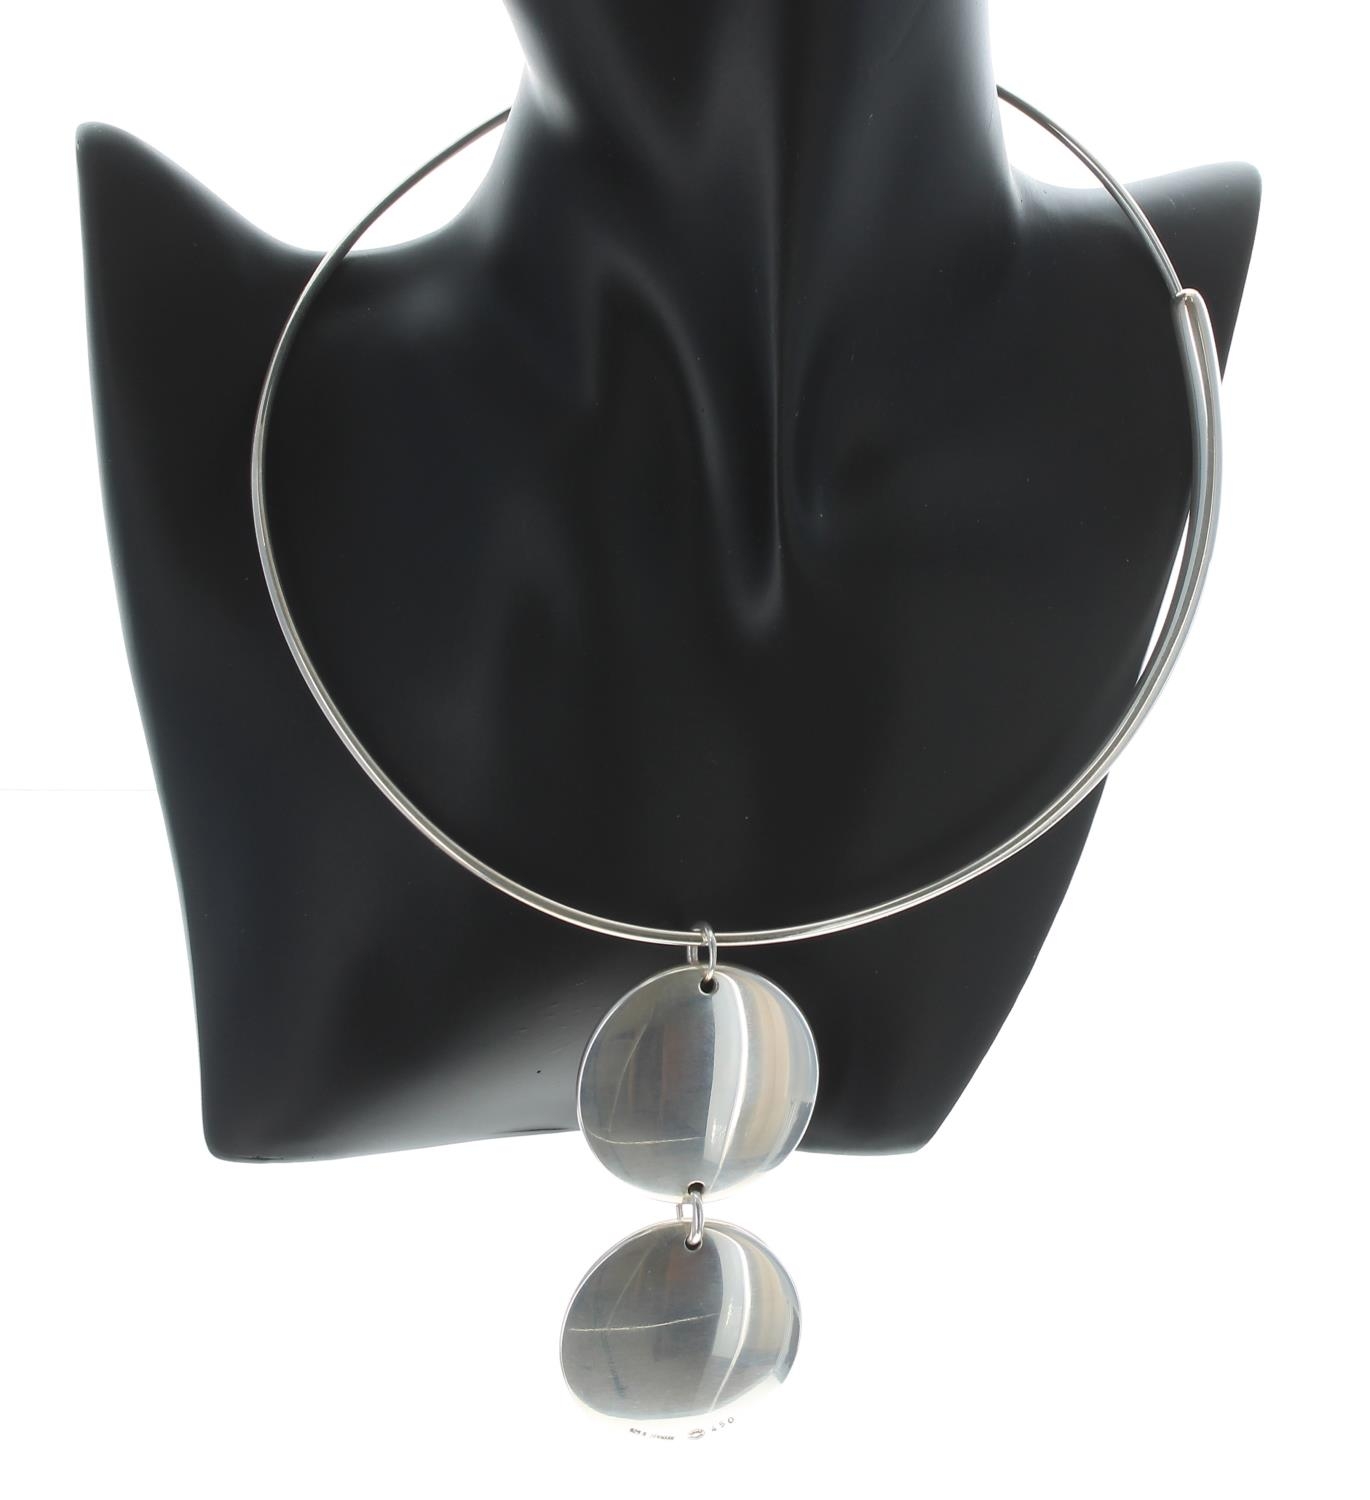 Georg Jensen 'Zero' silver necklace designed by Jacqueline Rabun, no. 450, signed ** with the - Image 3 of 5